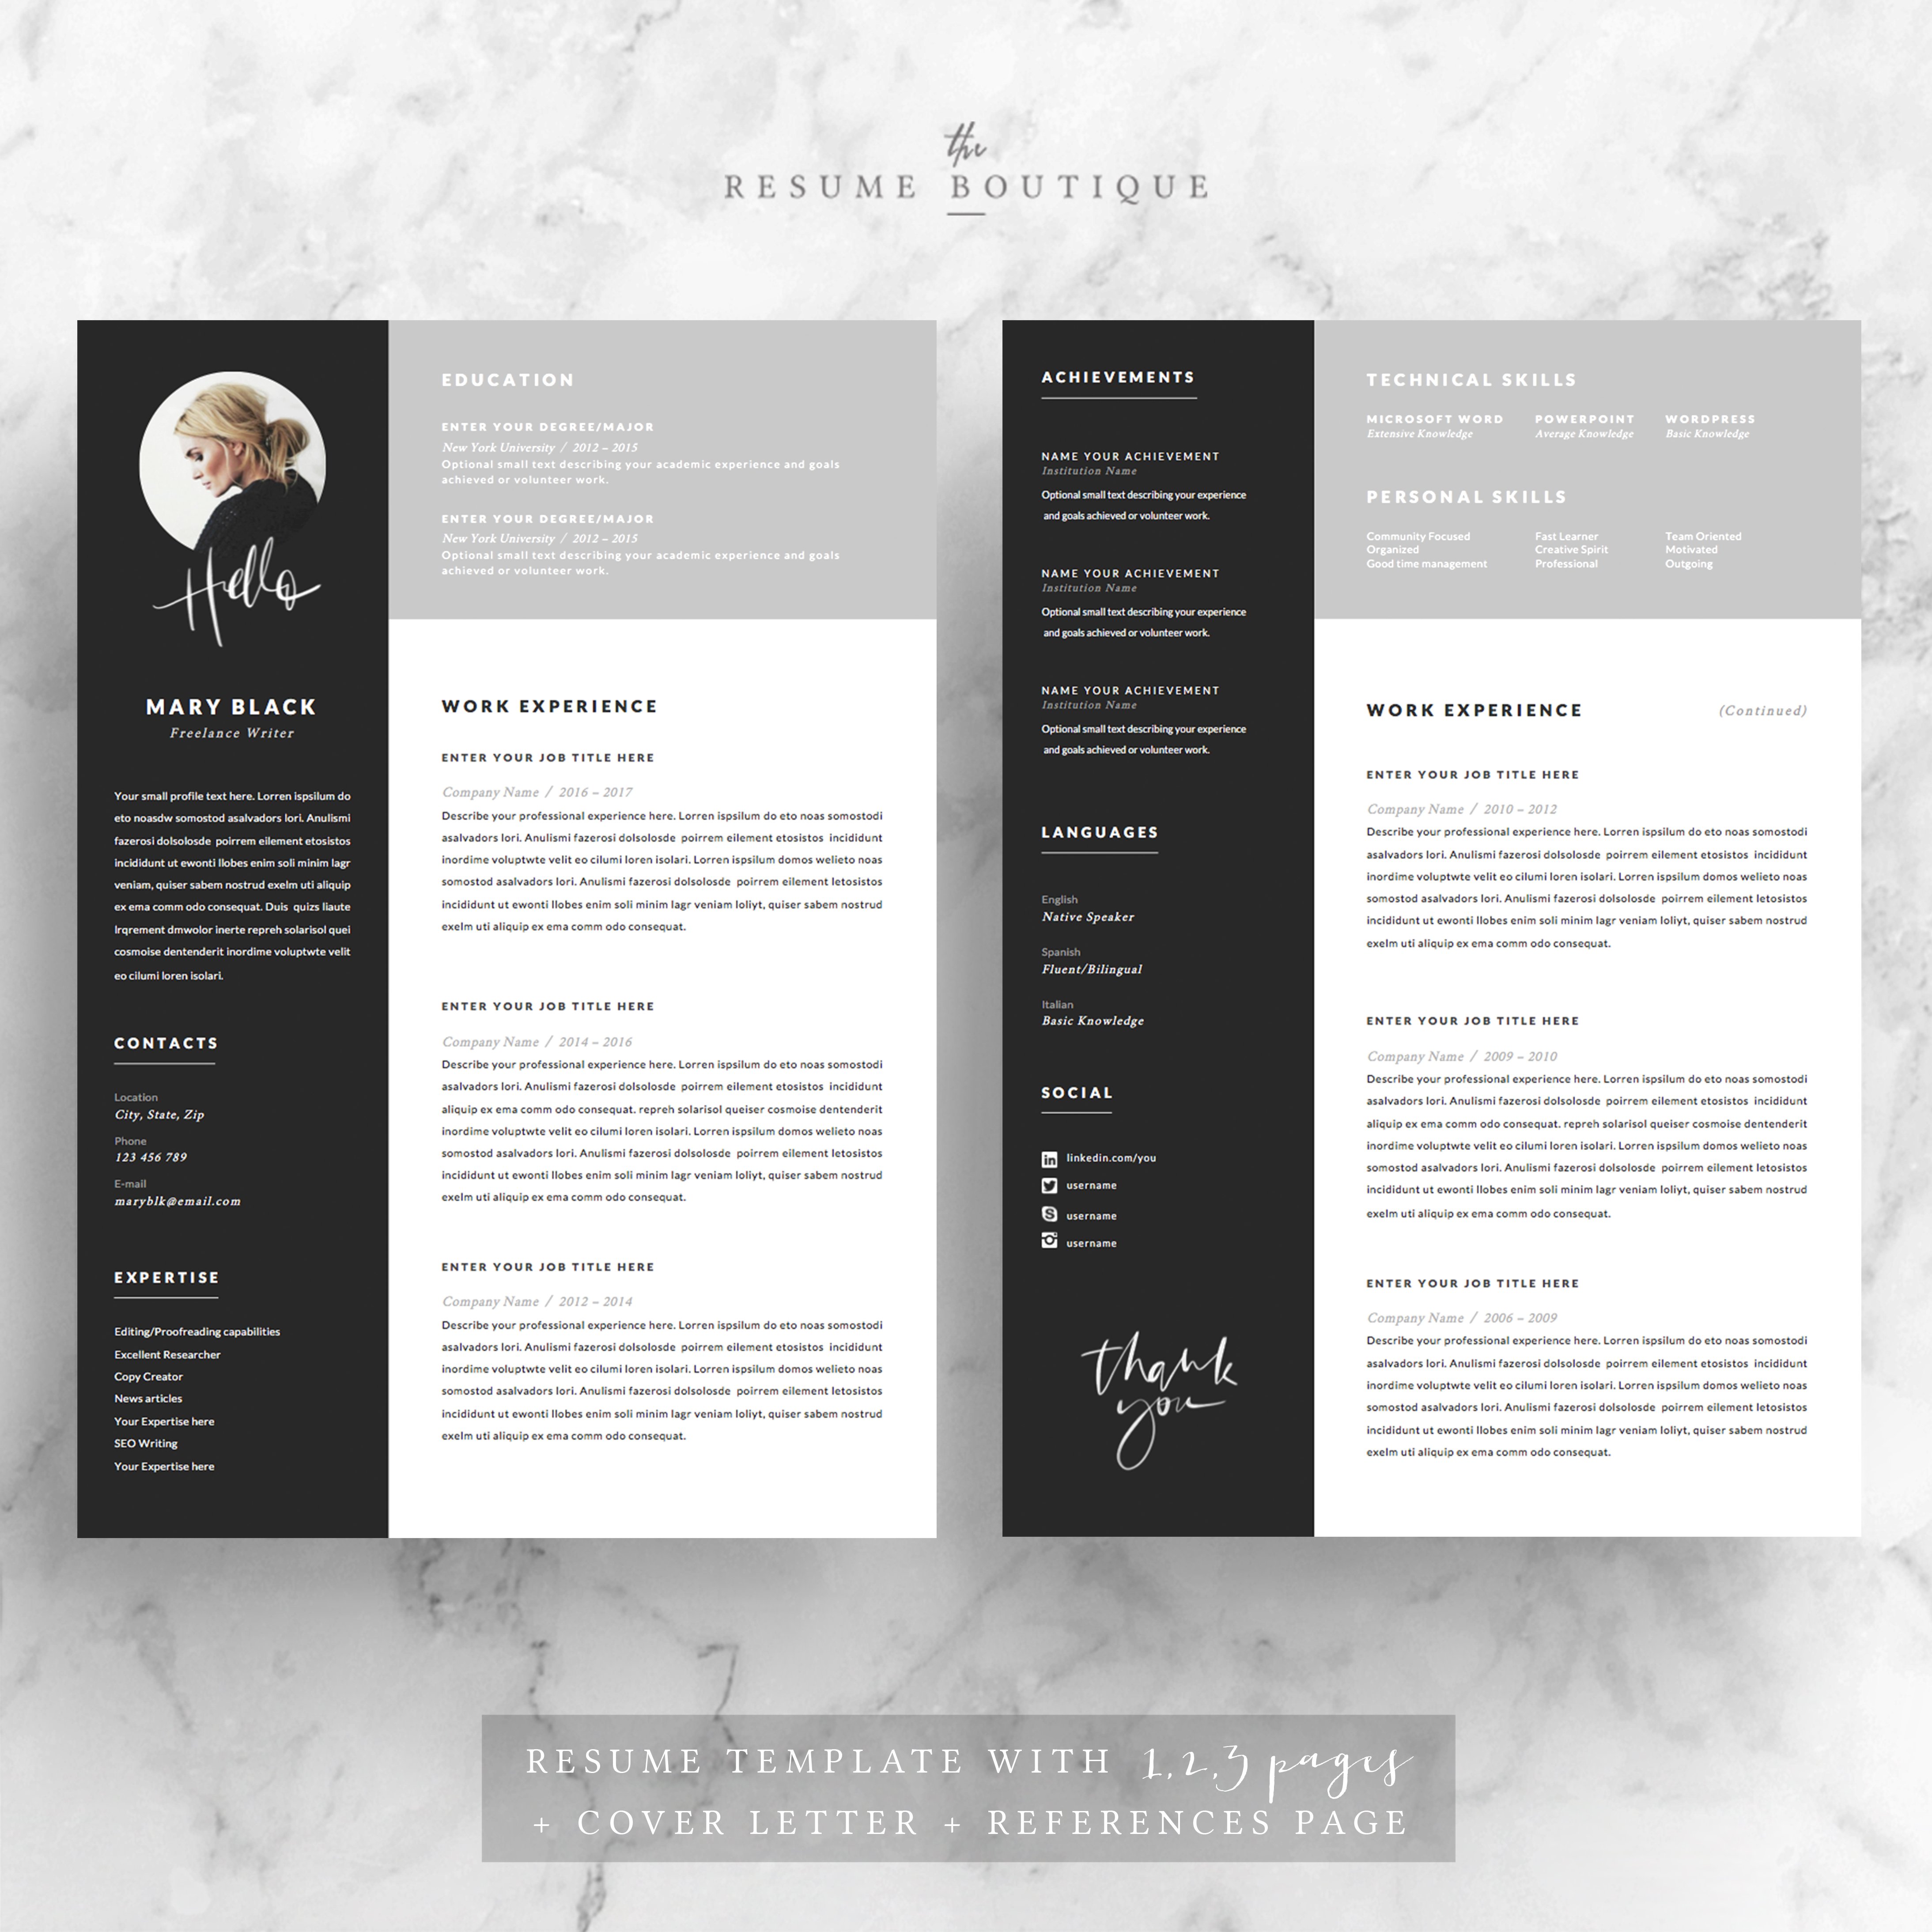 5 page Resume Template | Blackie preview image.